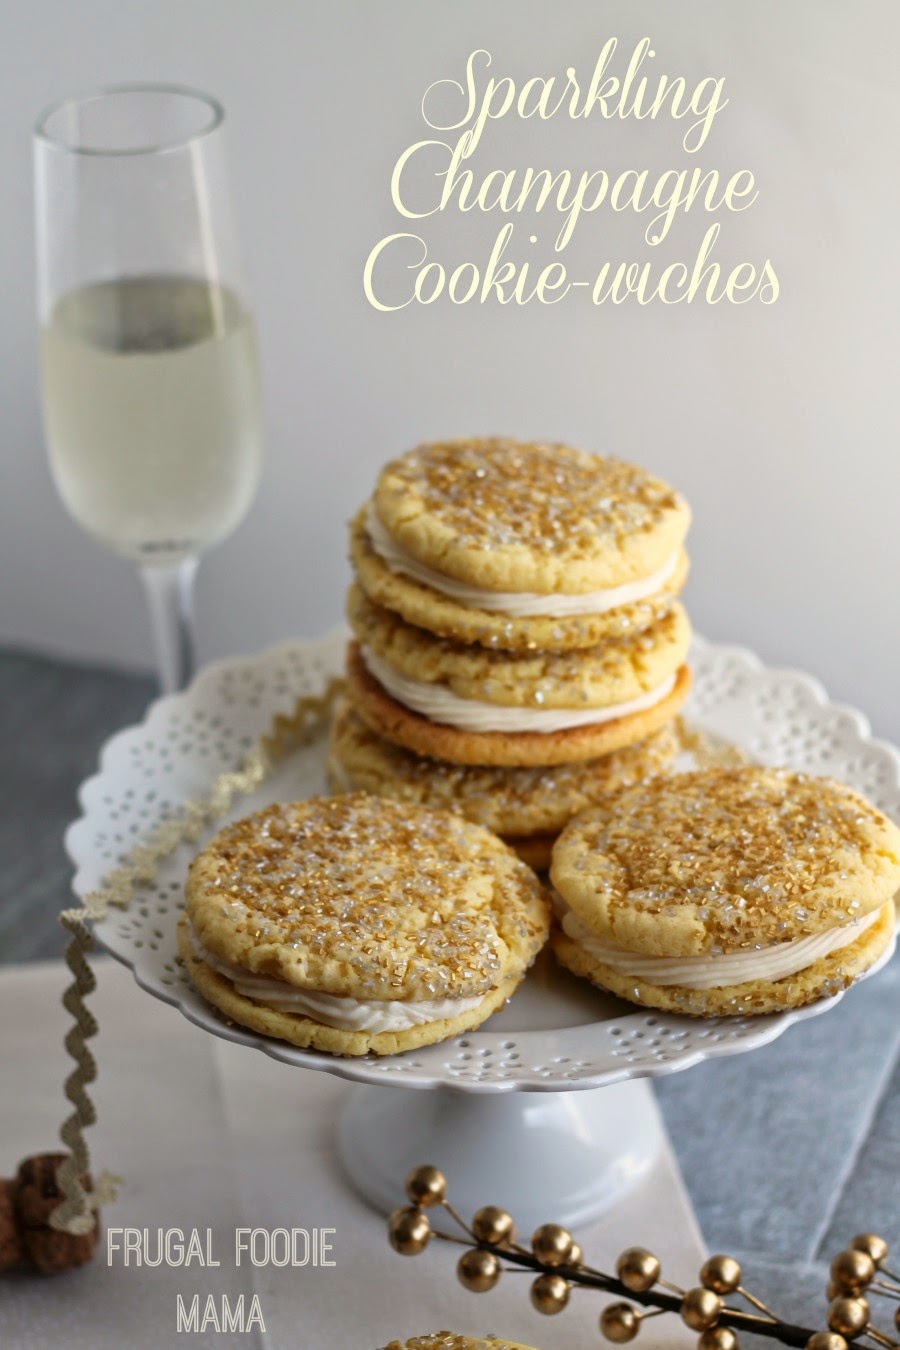 A rich champagne buttercream is sandwiched between two thick & soft sparkling sugared cookies in these Sparkling Champagne Cookie-wiches